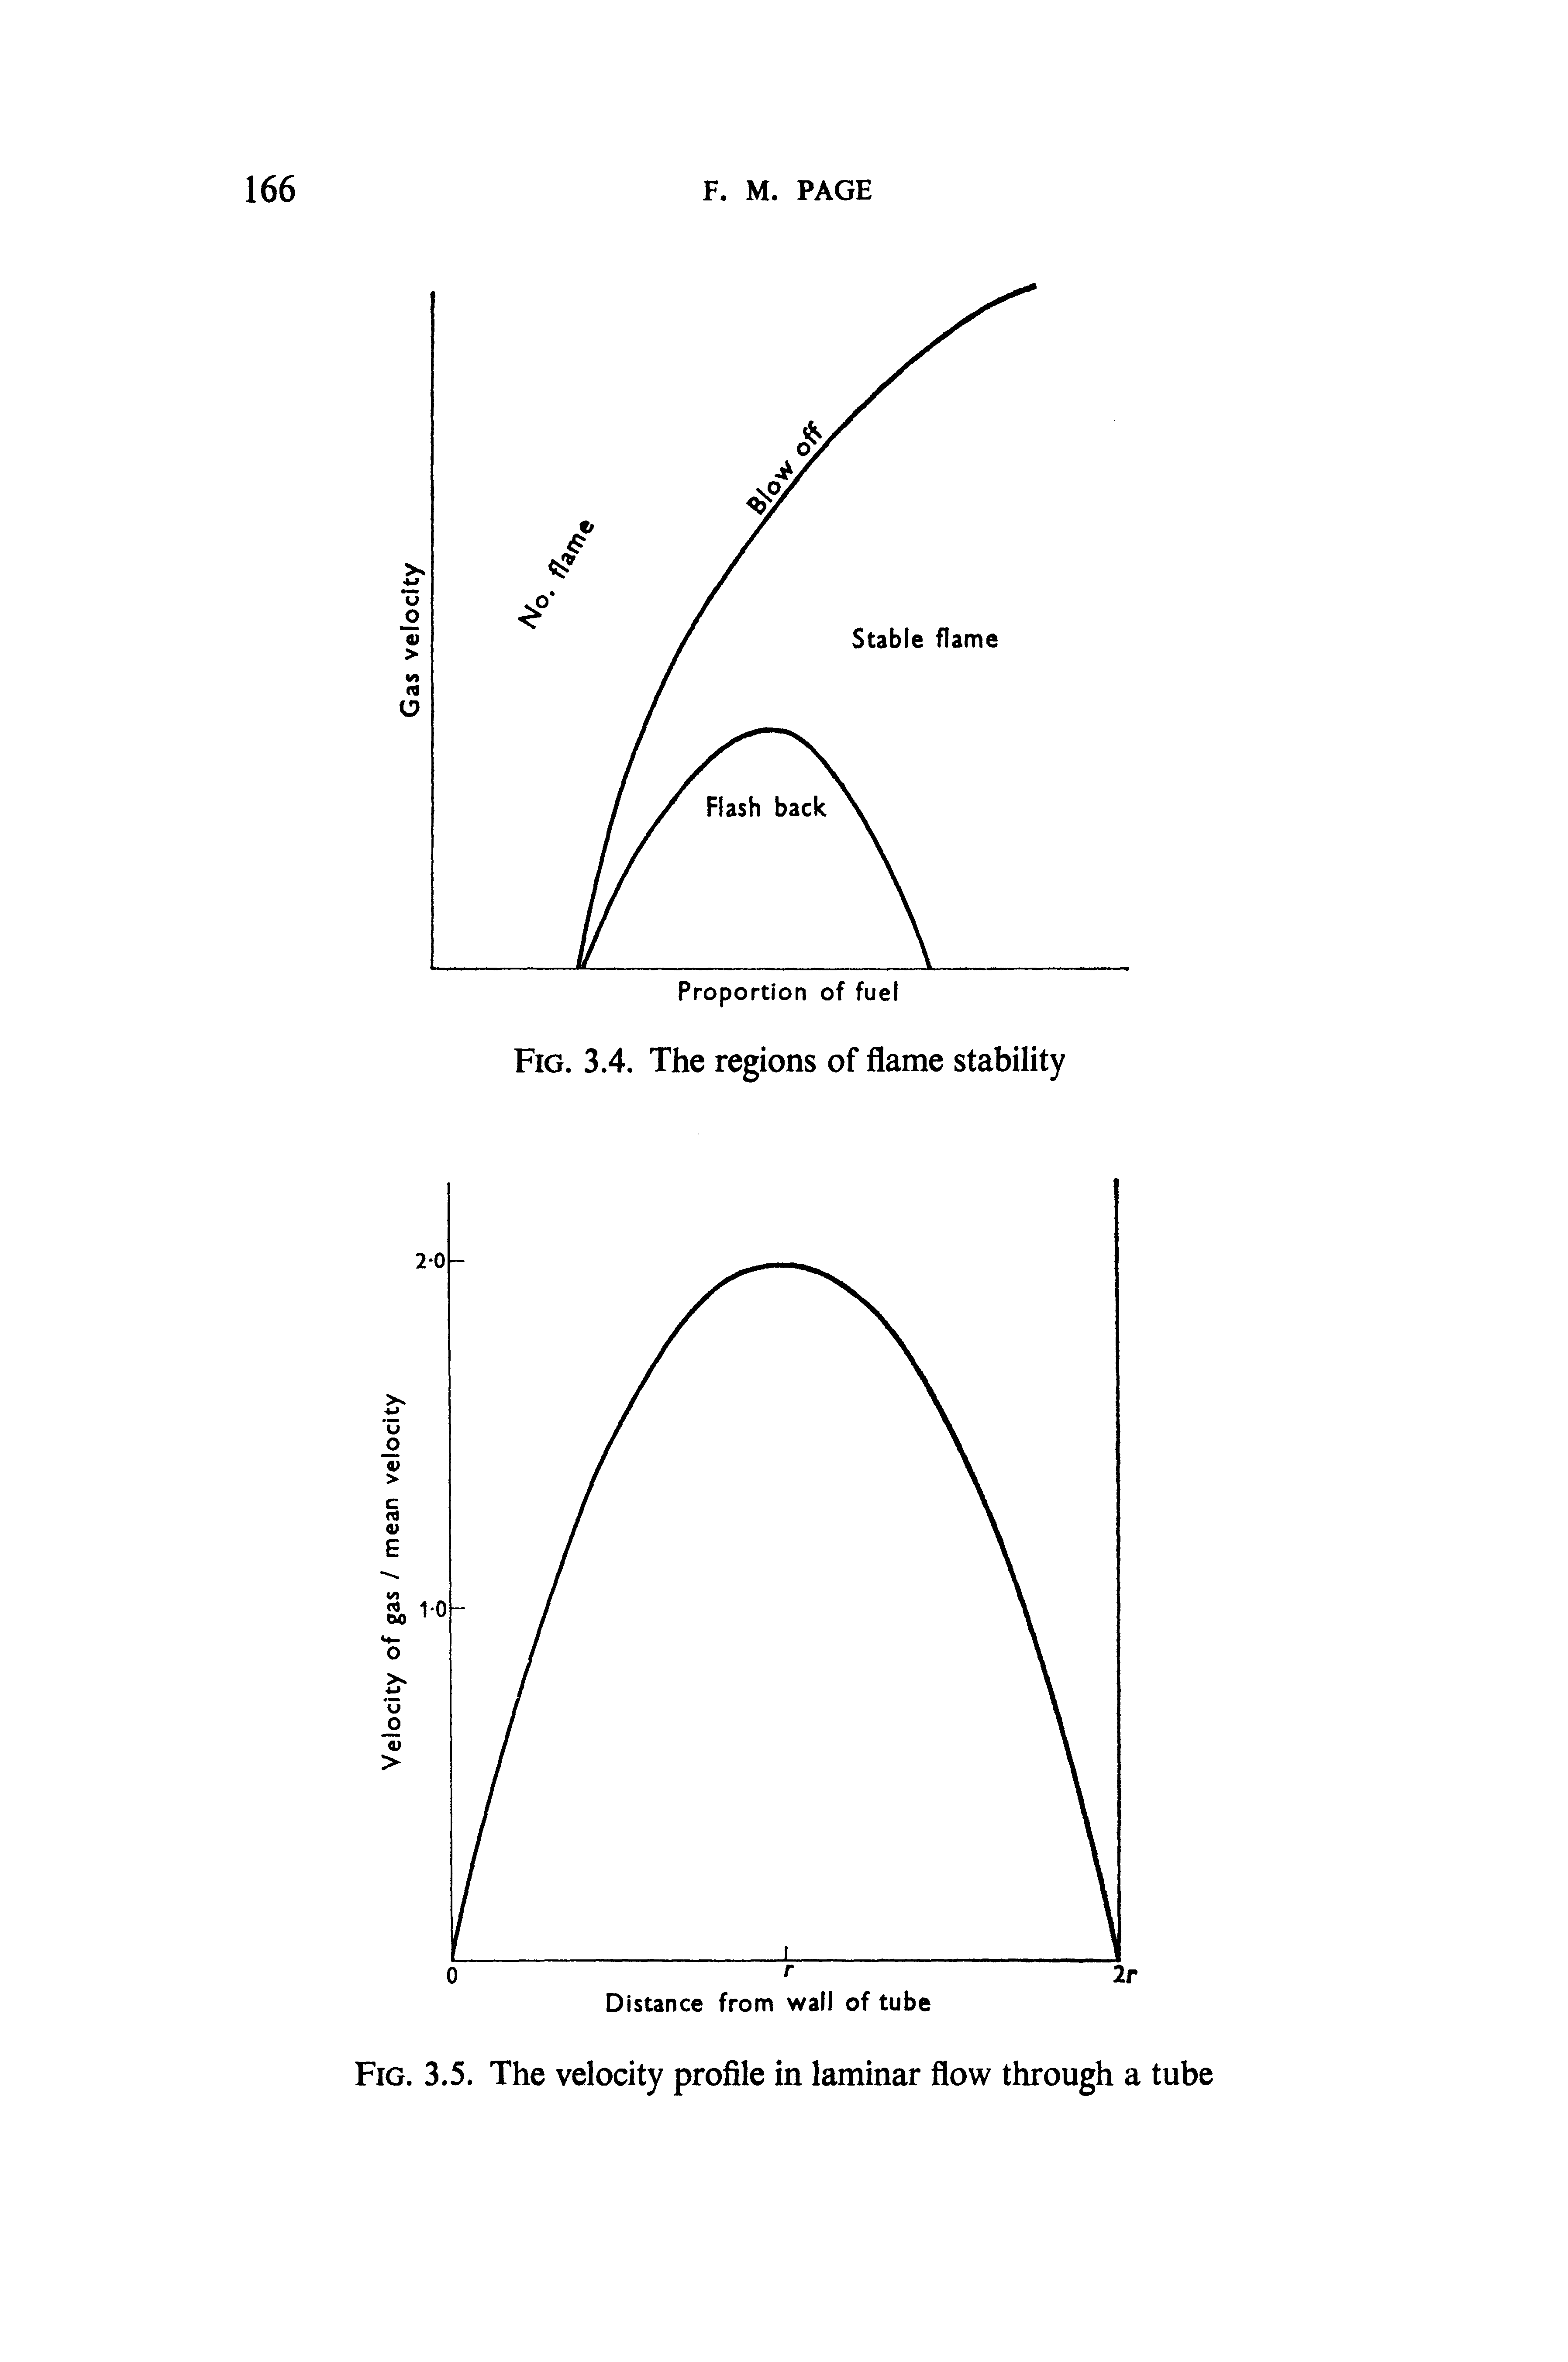 Fig. 3.5. The velocity profile in laminar flow through a tube...